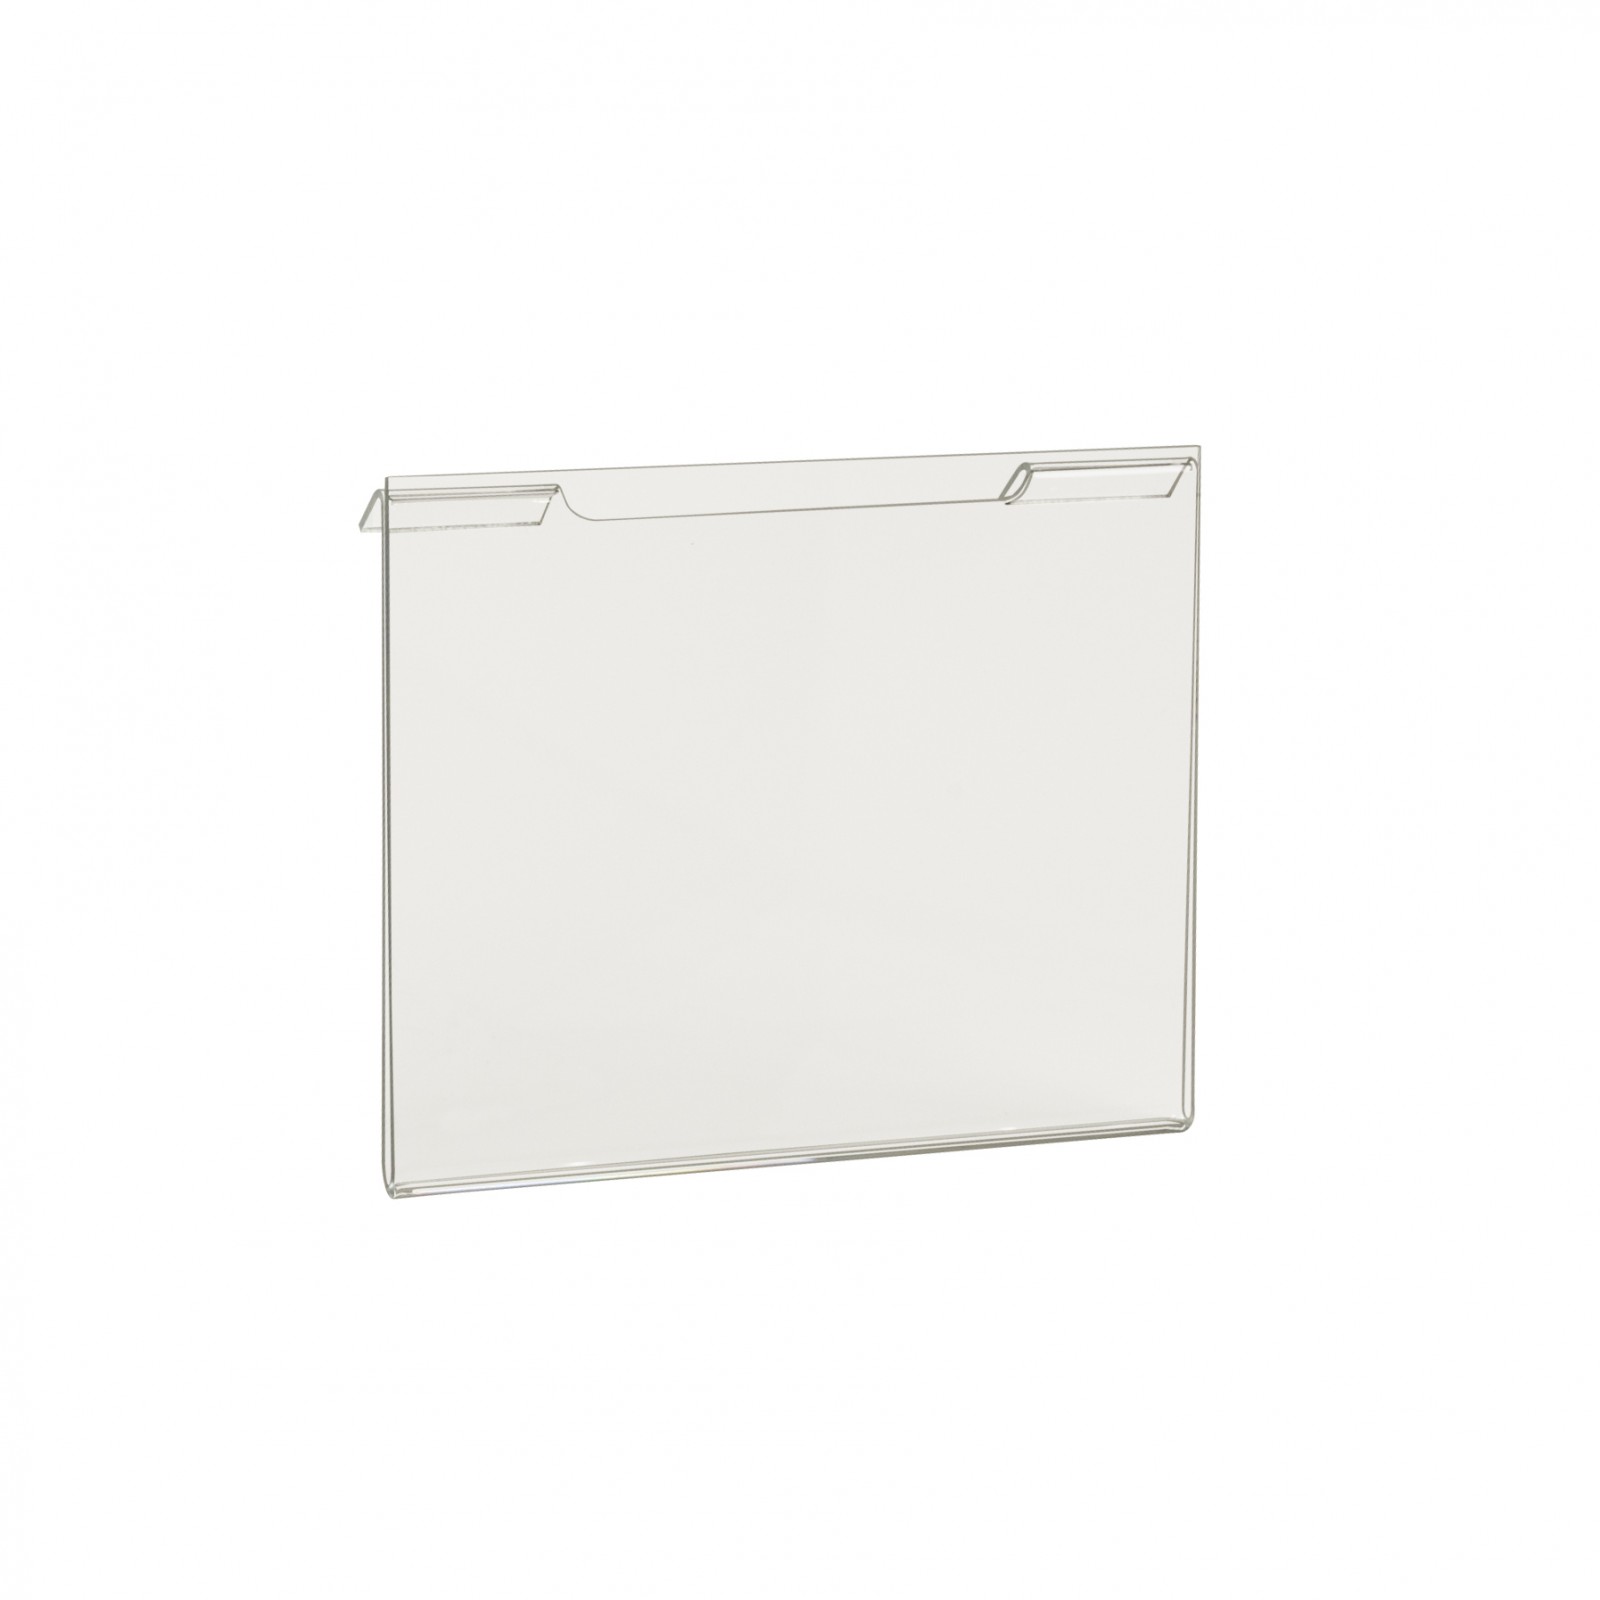 Acrylic Sign Holder for Gridwall or Slatwall 5 1/2"h x11"w